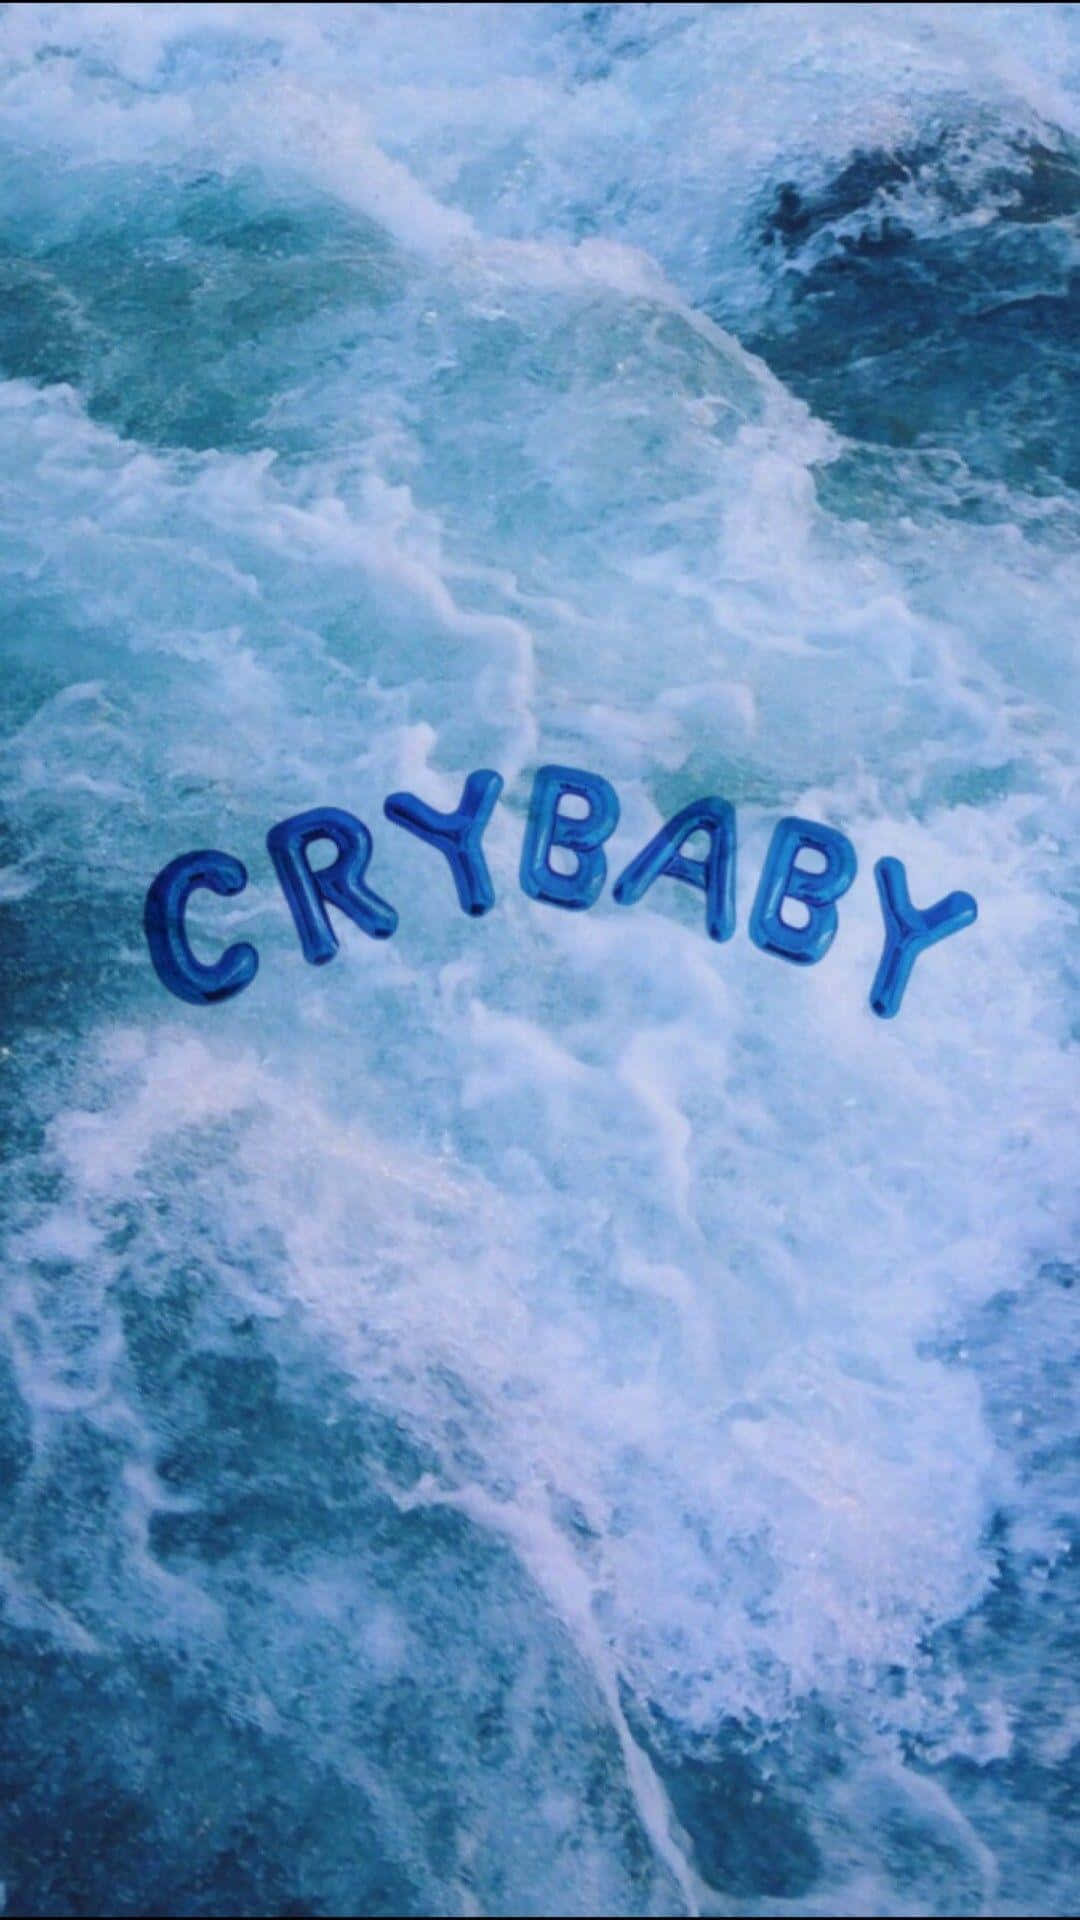 Crybaby - Cd Cover Art